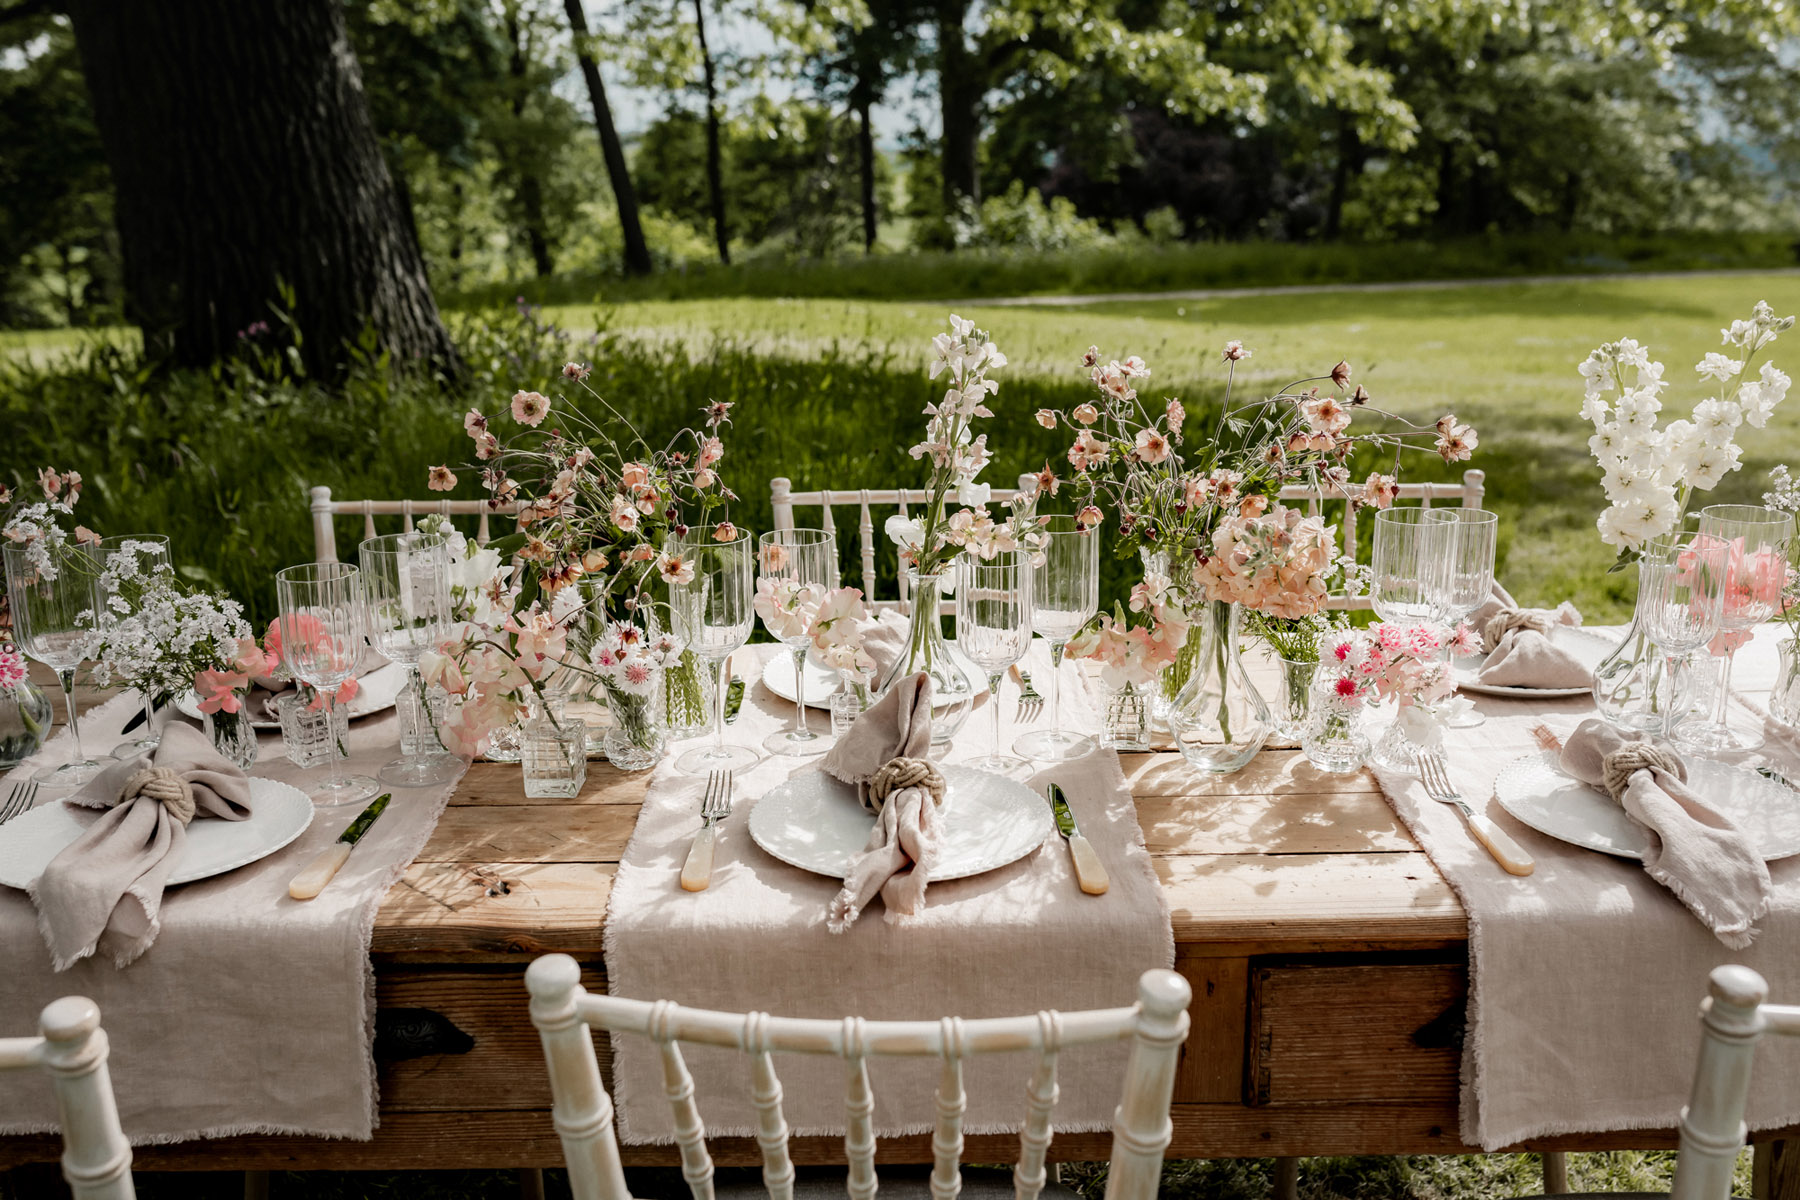 Outdoor wedding table decorated with British grown seasonal Spring flowers and pale table linens